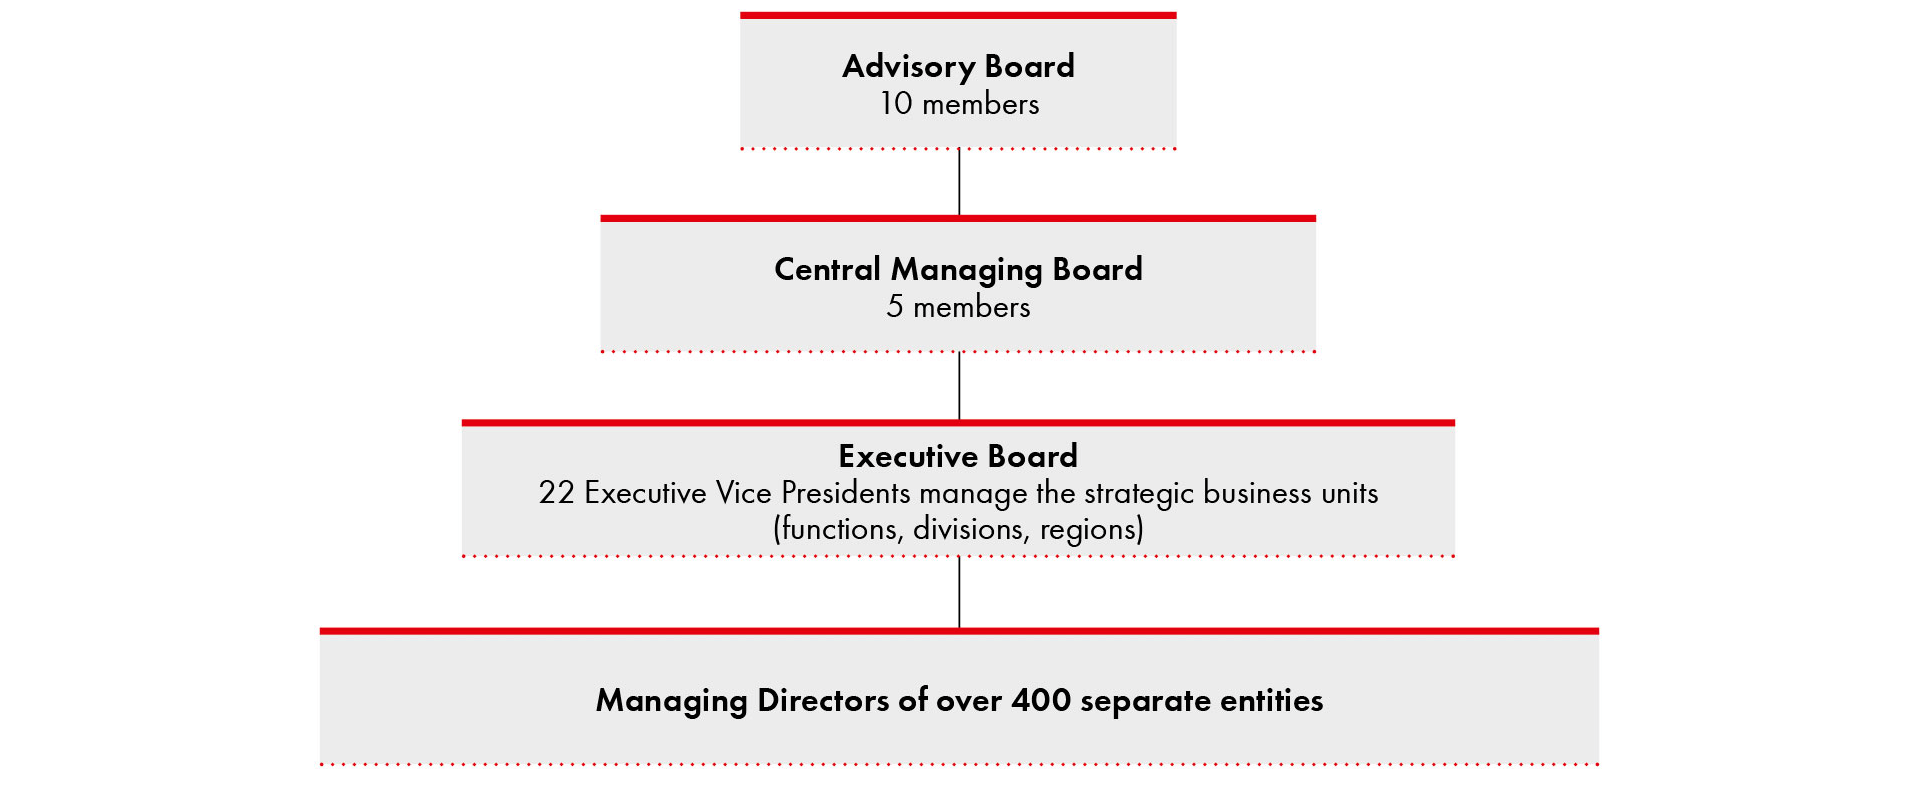 Organizational Structure of the Würth Group